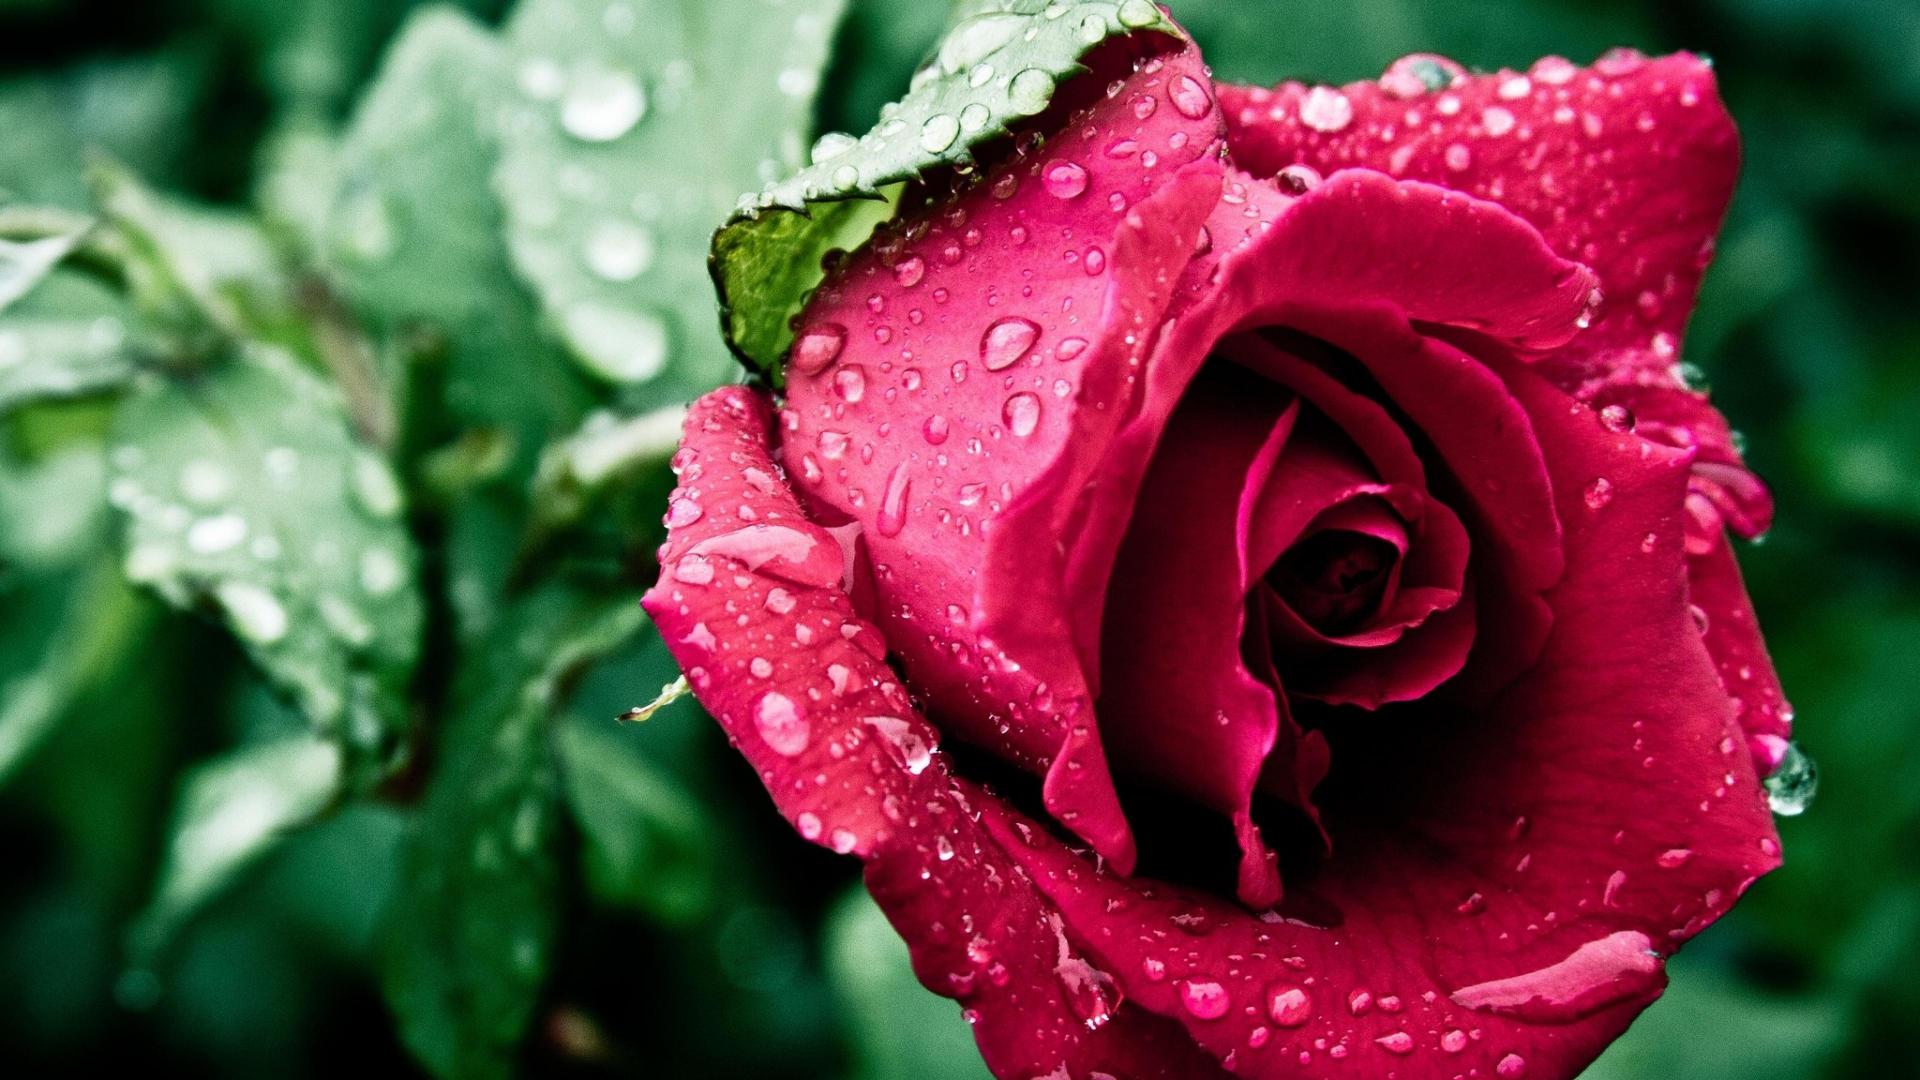 Nature Wallpaper with Red Rose Flower and Water Drops | HD ...